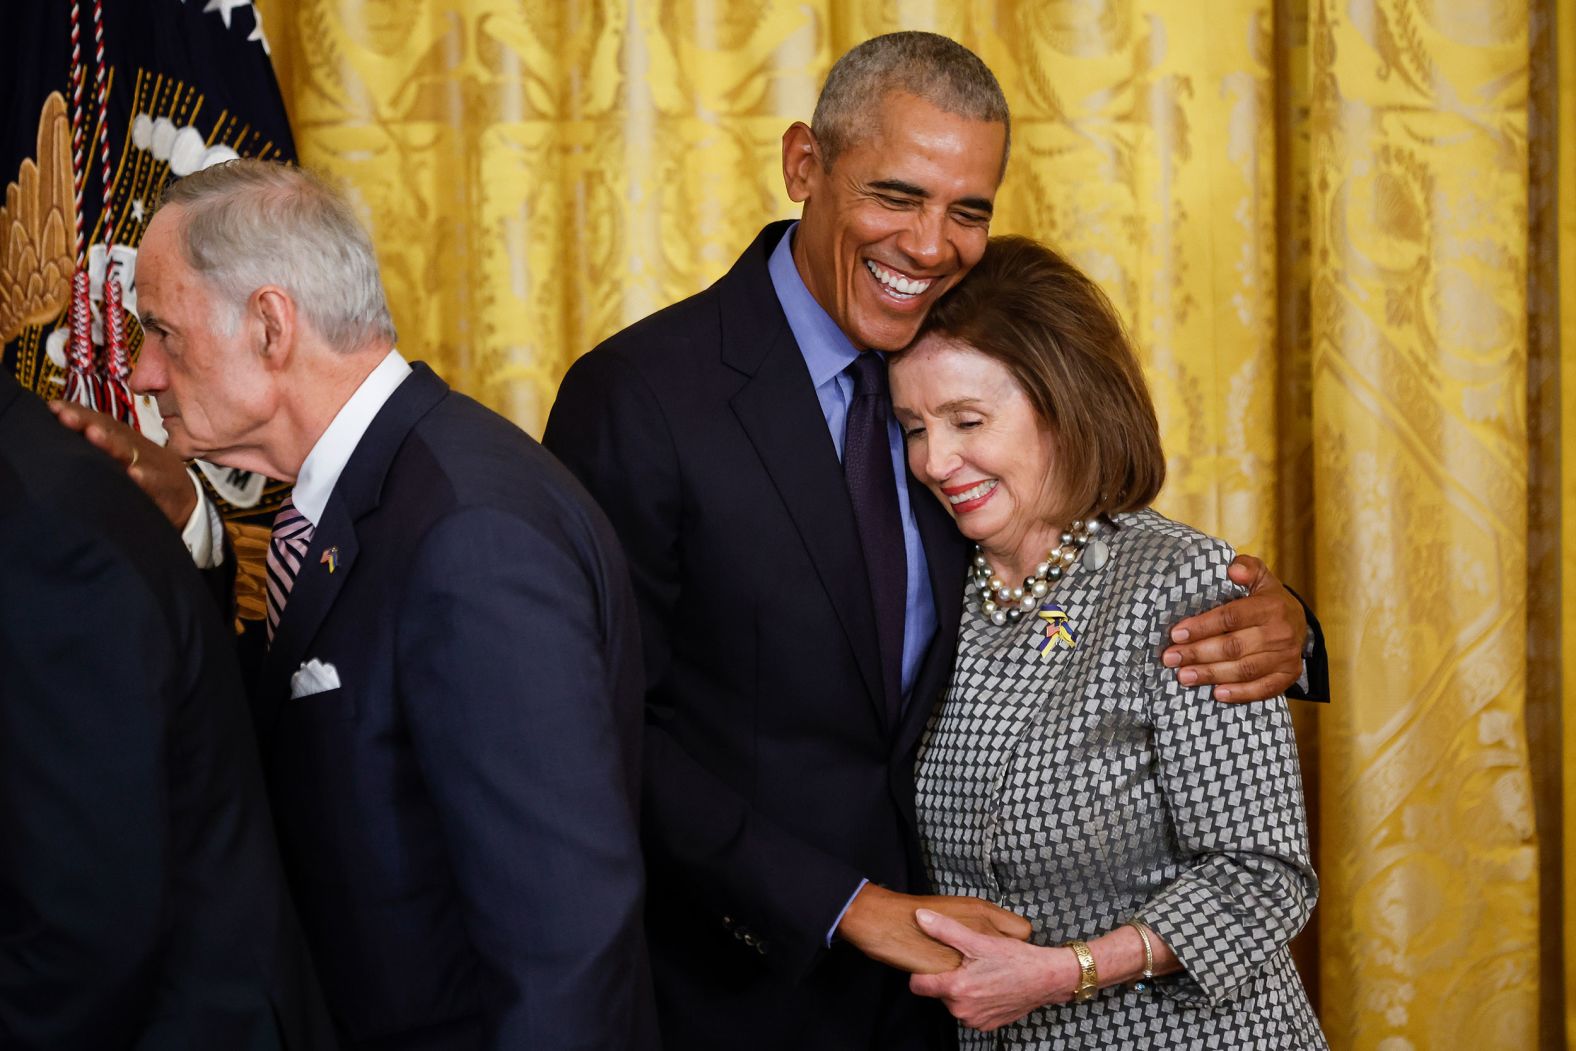 Obama hugs House Speaker Nancy Pelosi at the end of the event Monday.